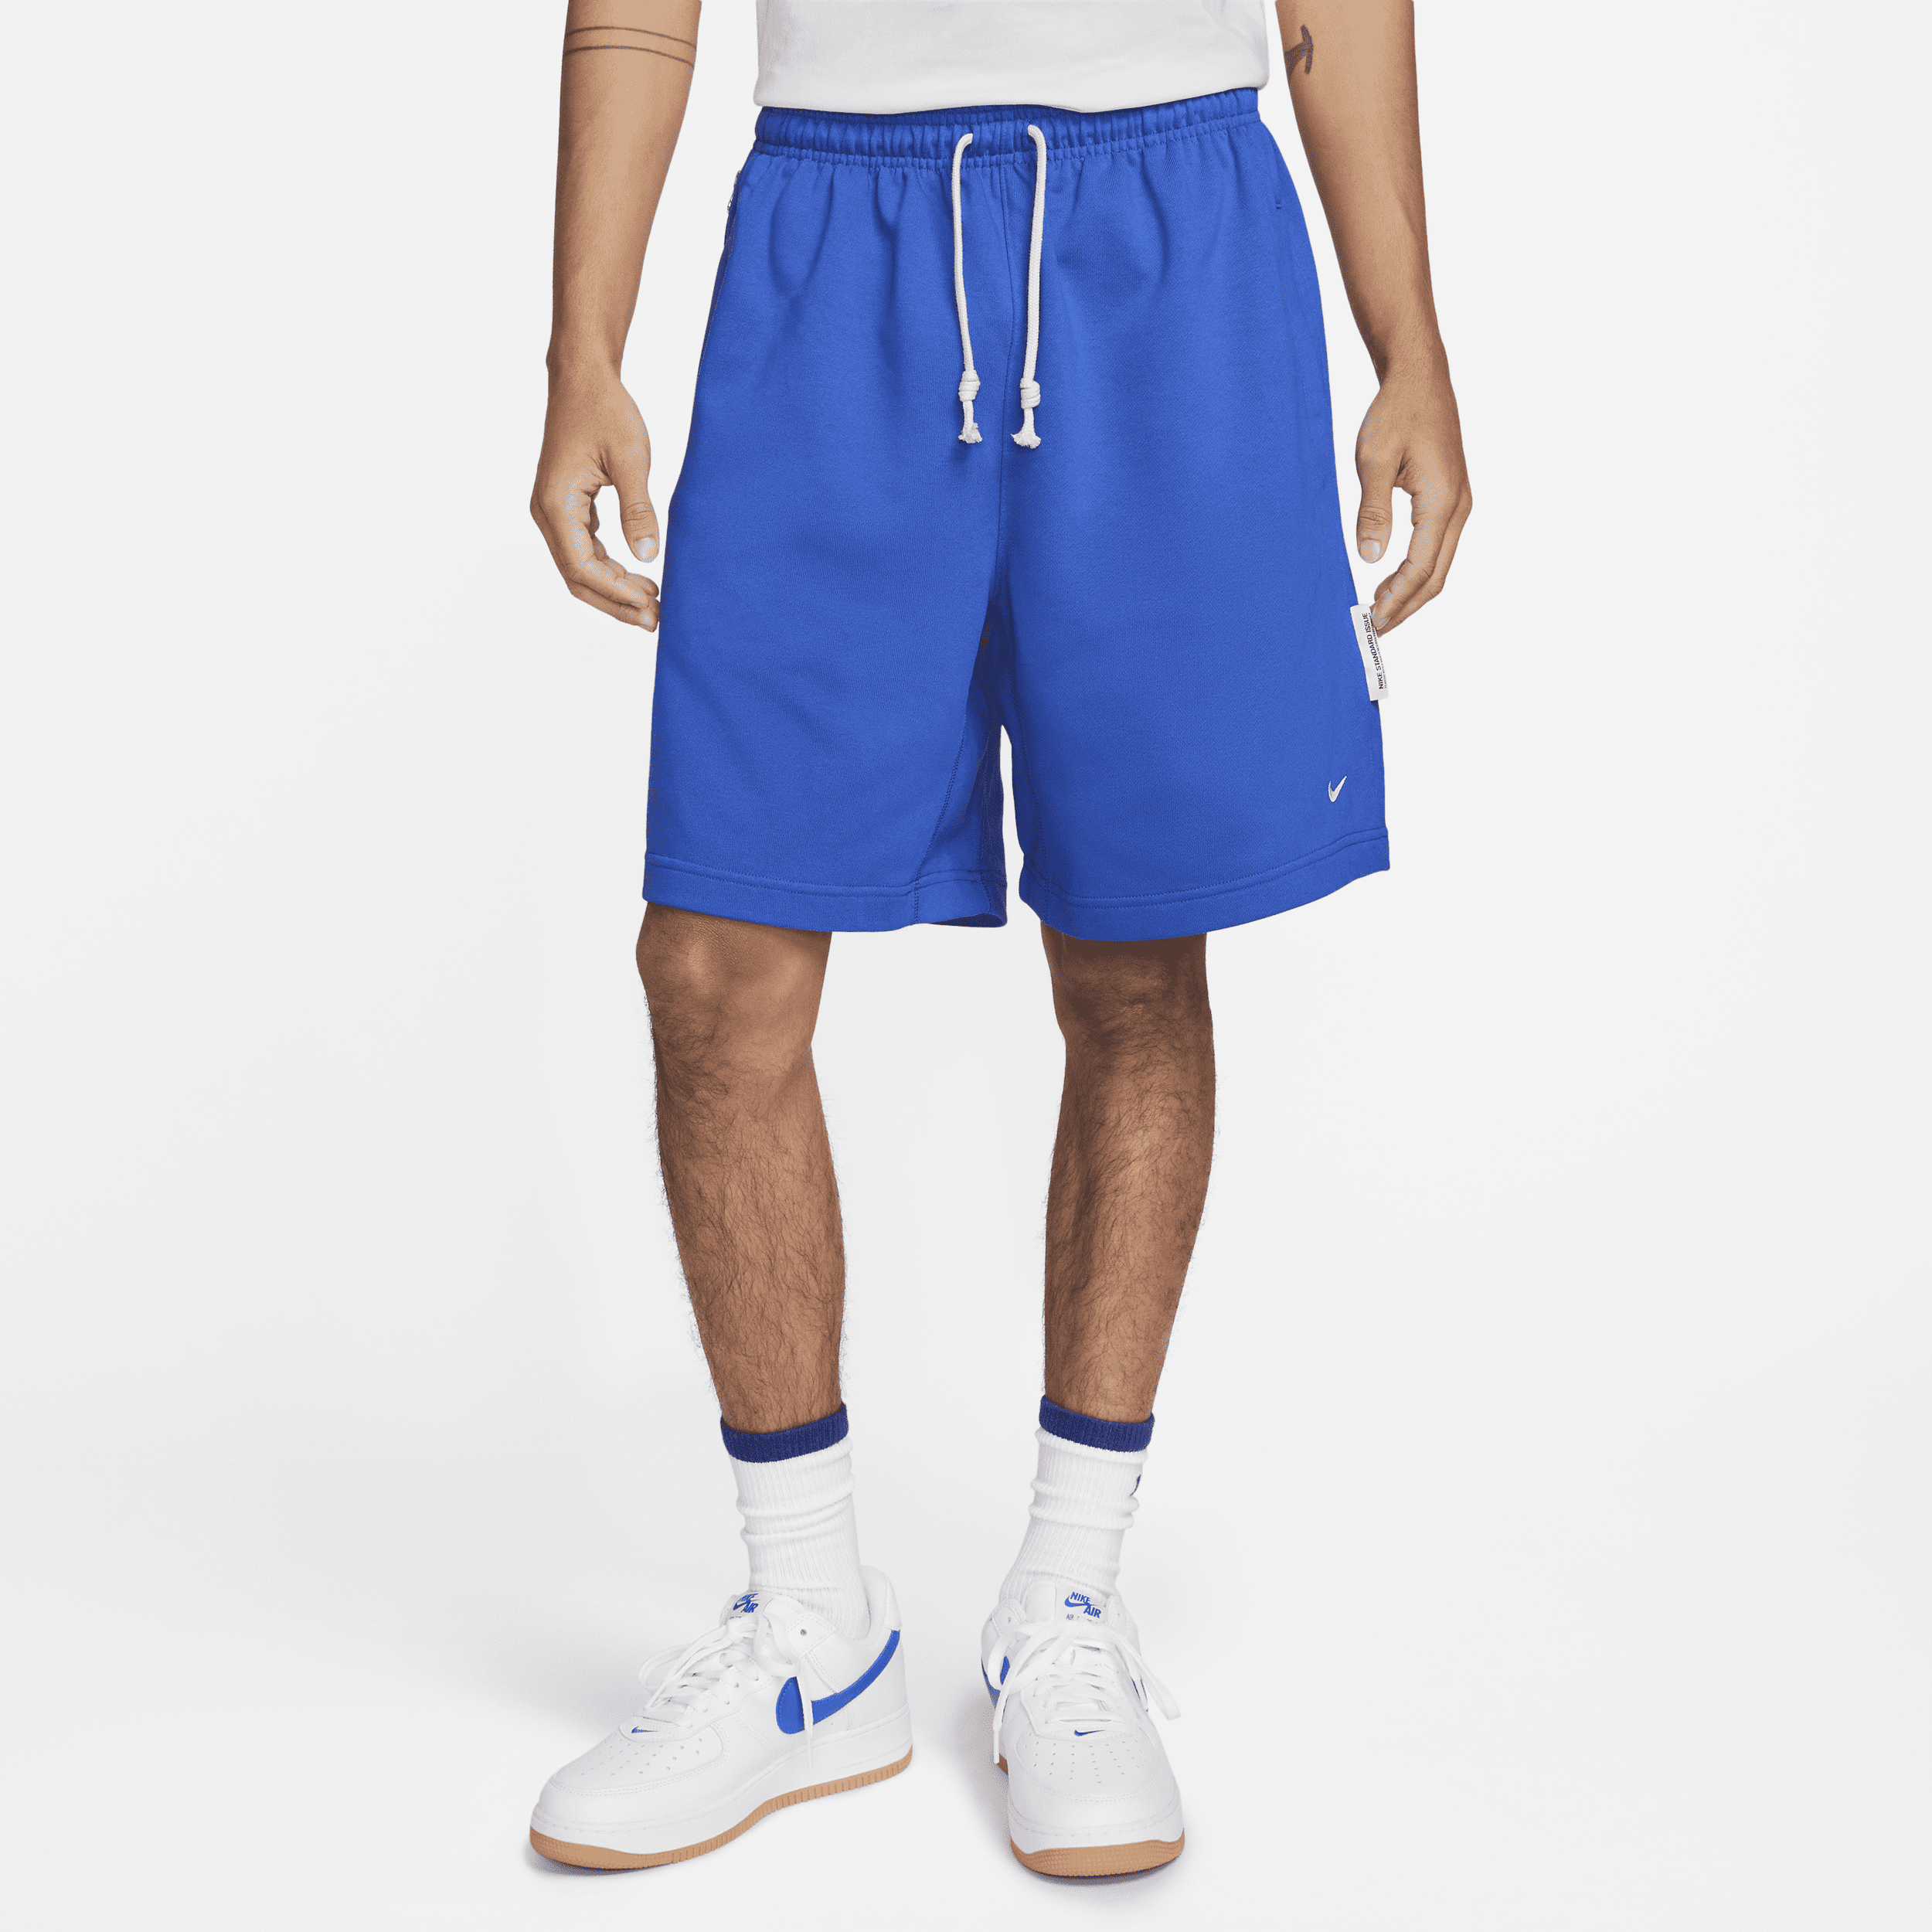 Nike Men's Standard Issue Dri-fit 8" Basketball Shorts In Blue